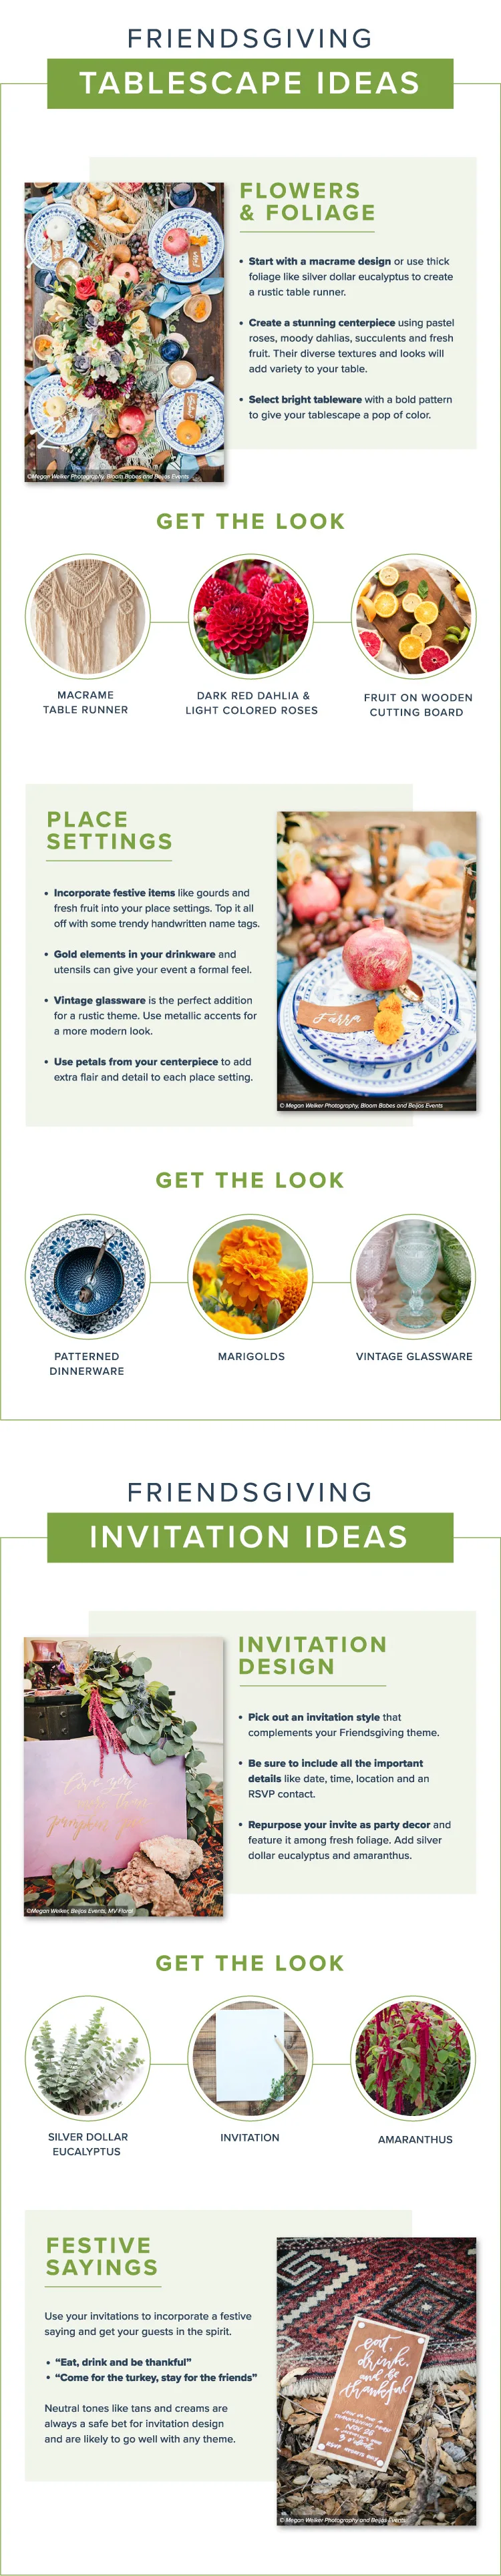 Friendsgiving Ideas and Tips for The Ultimate Party